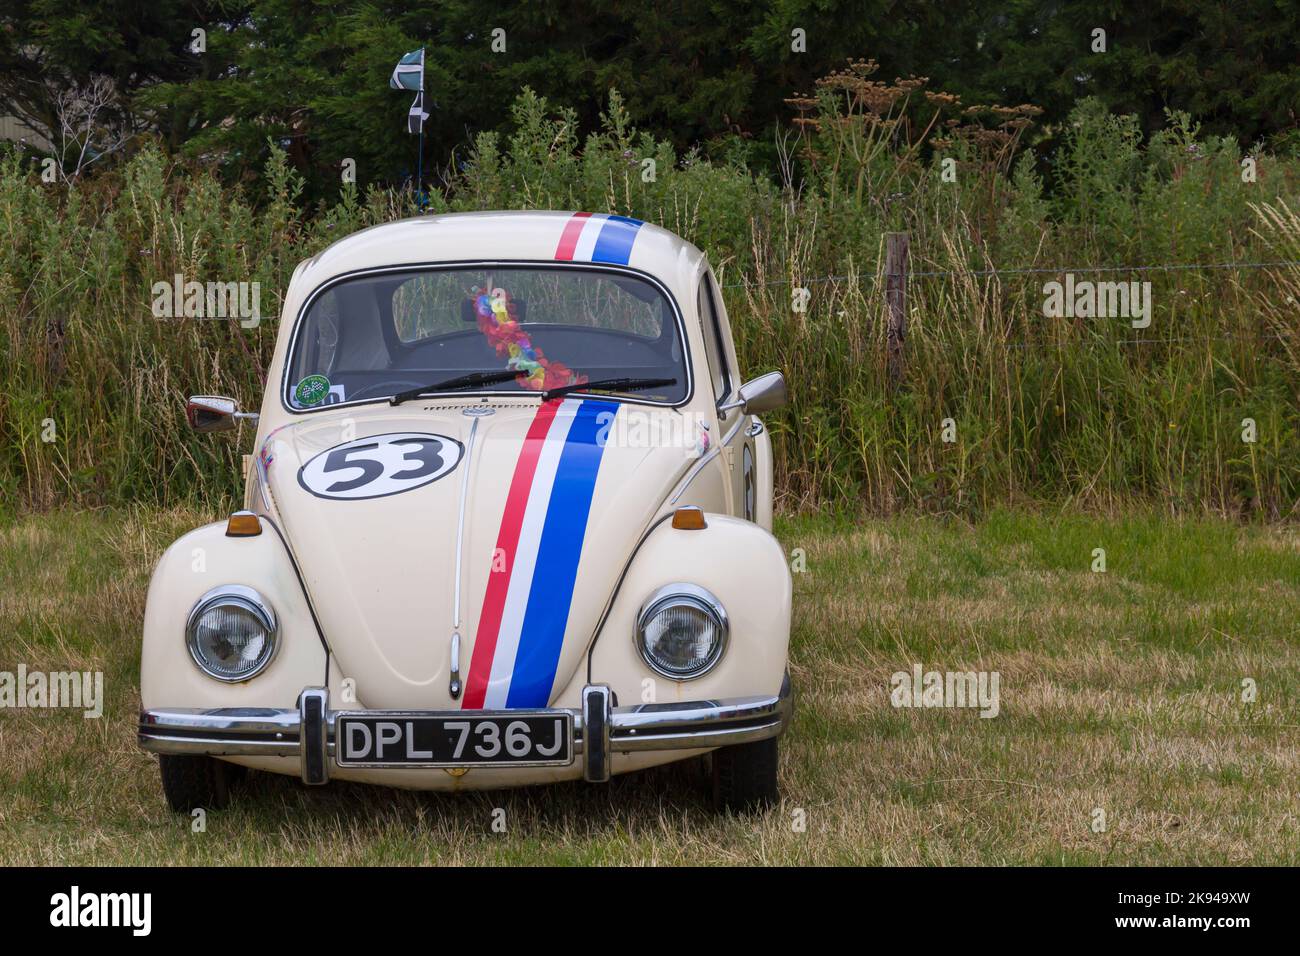 1970's Volkswagen Beetle car, VW Beetle, painted in the style of Herbie in the movie at The Love Bug at Chickerell Steam & Vintage Show, Dorset, UK Stock Photo